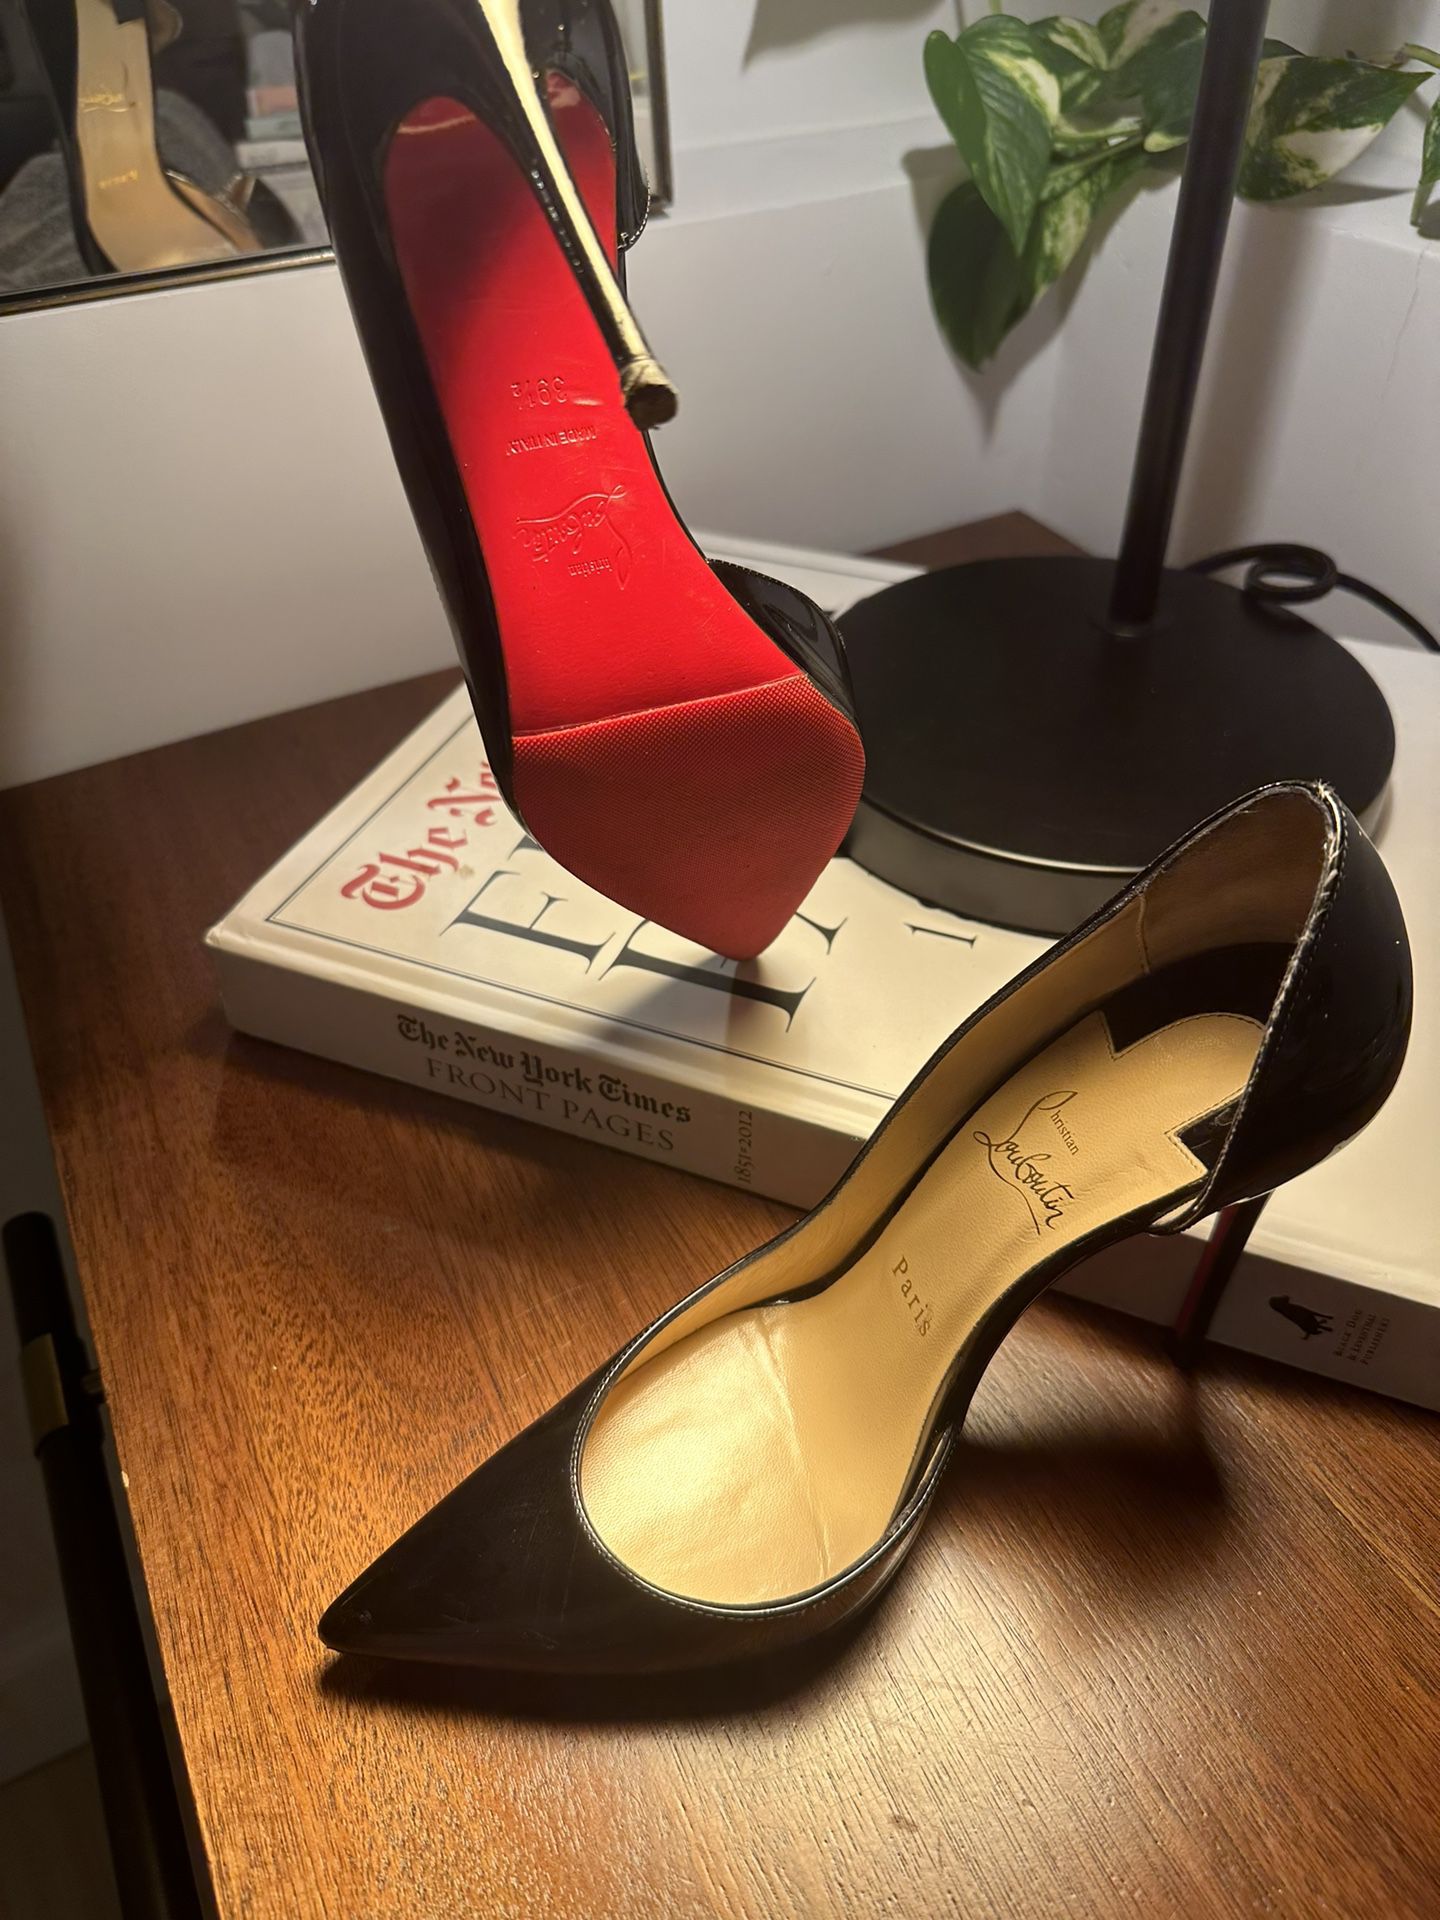 $350 Christian Louboutin Black Pumps with Red Bottoms - Size 39 1/2"